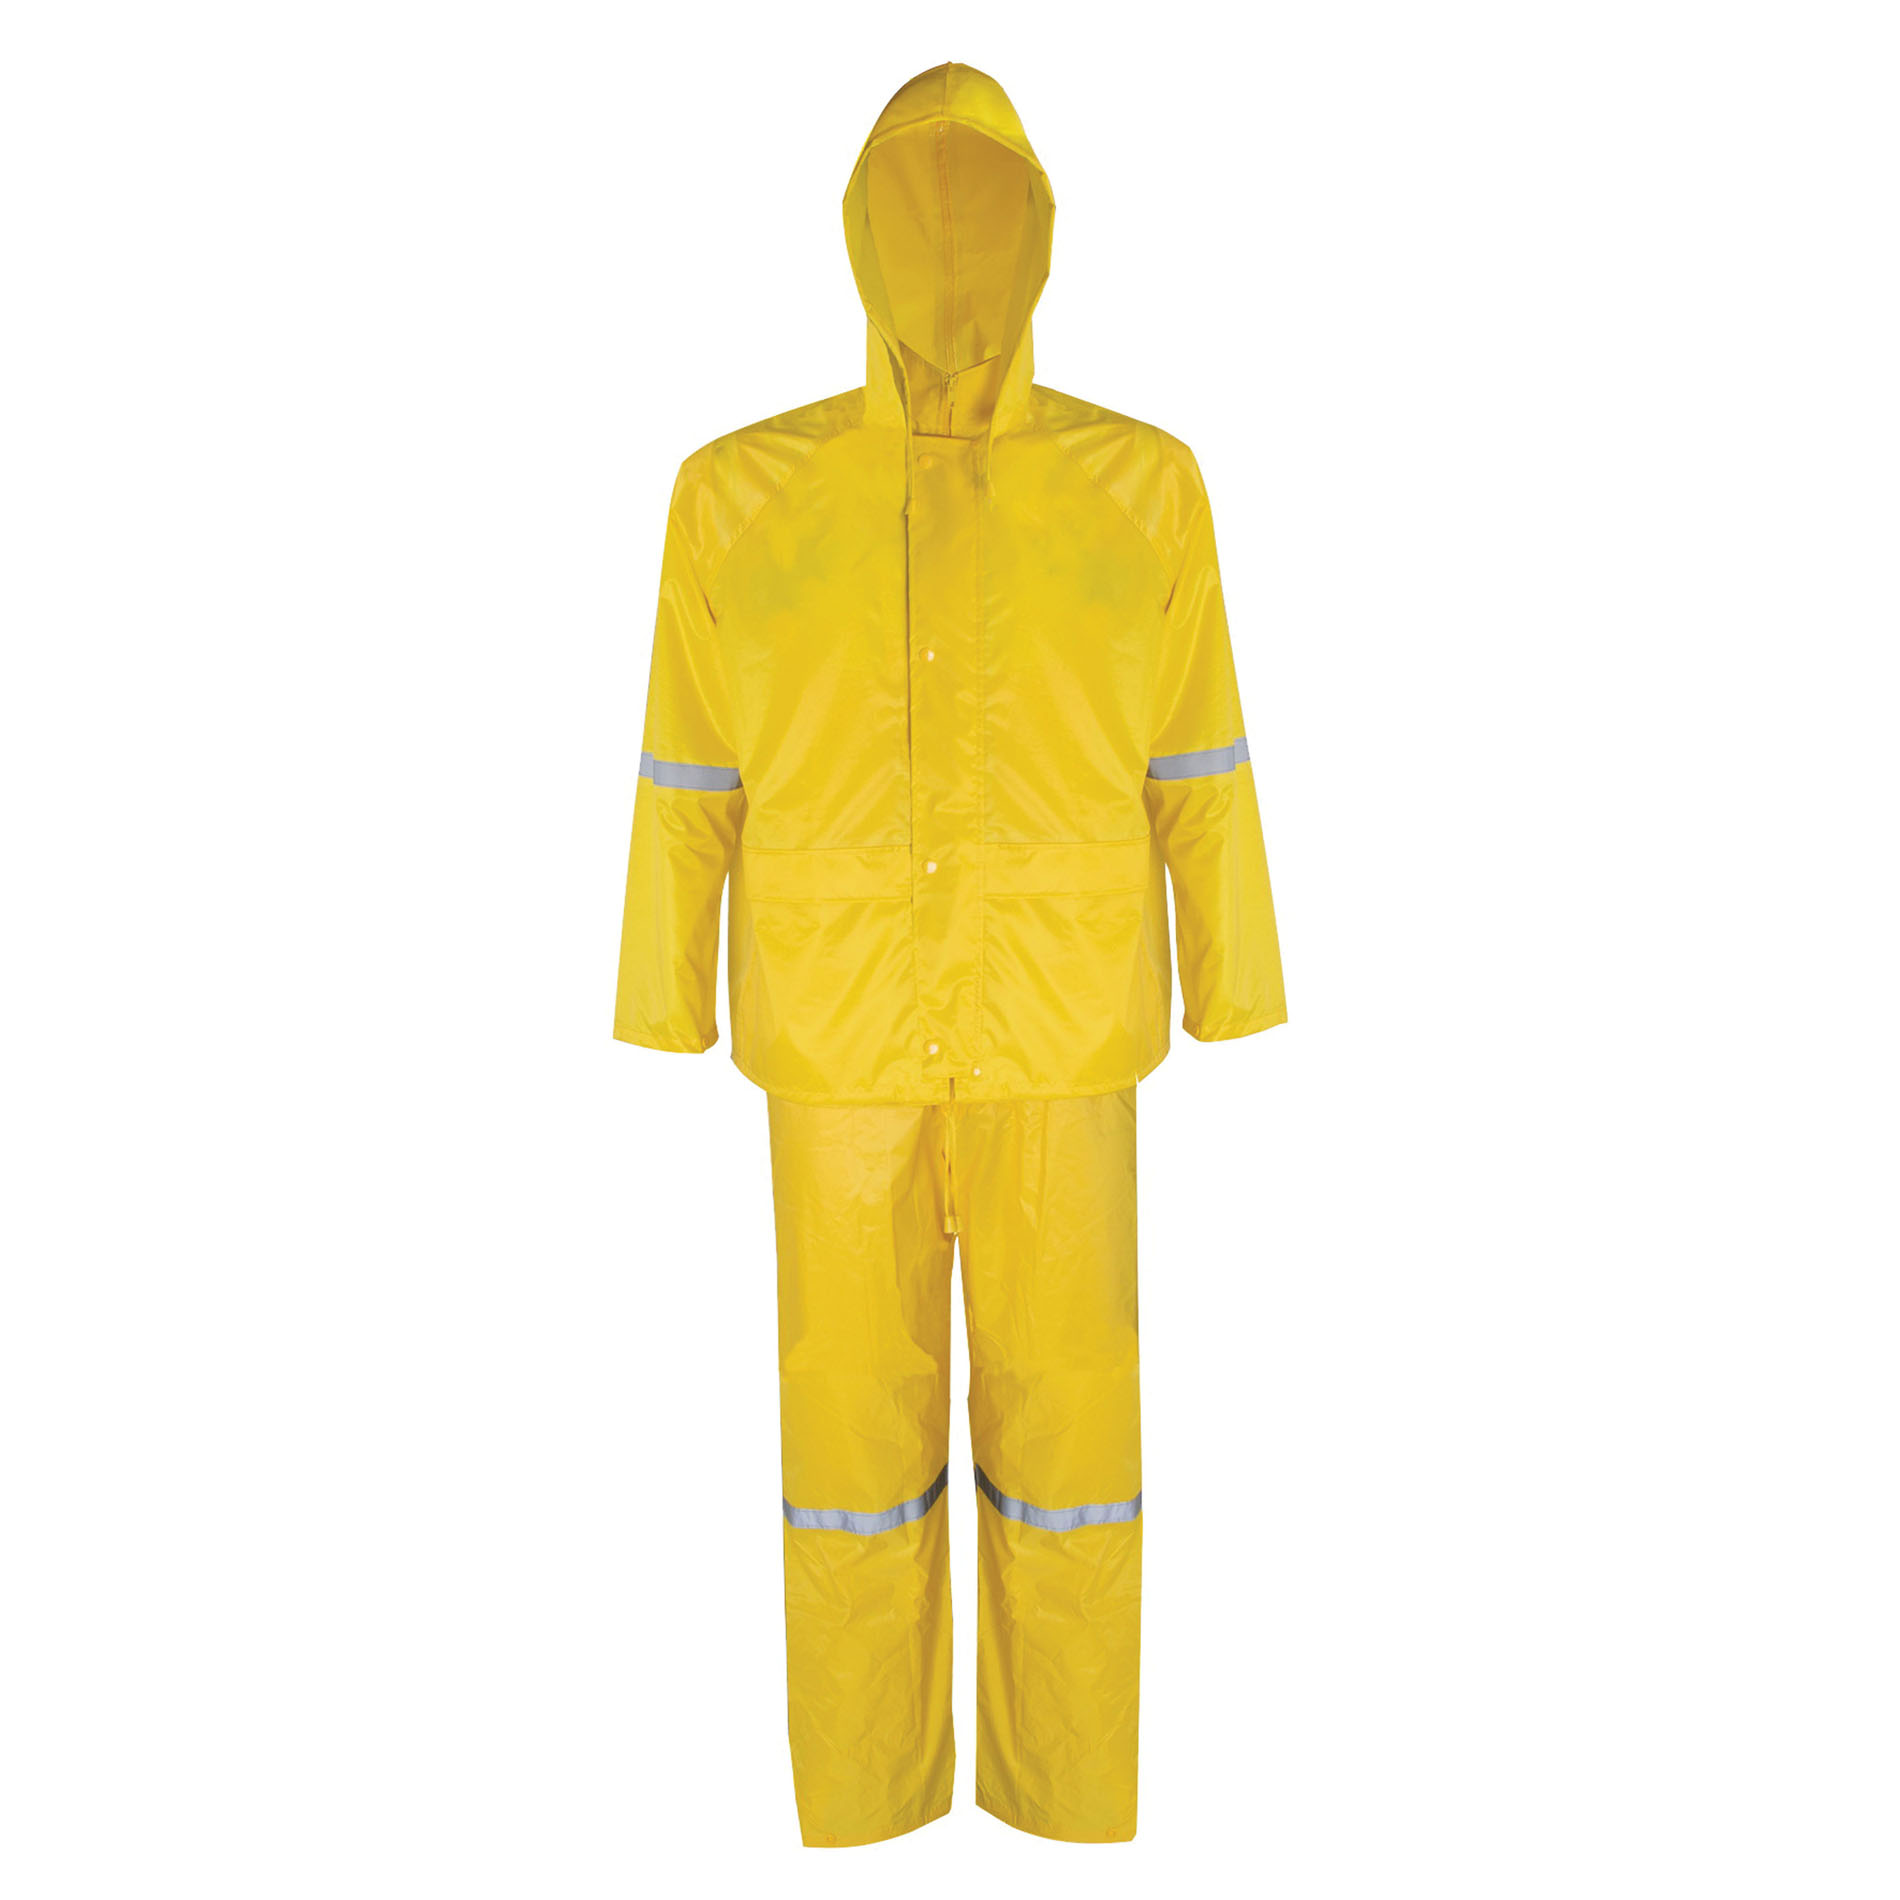 RS3-01-XXL Rain Suit, 2XL, 44 in Inseam, Polyester, Yellow, Concealed Collar, Zipper with Storm Flap Closure